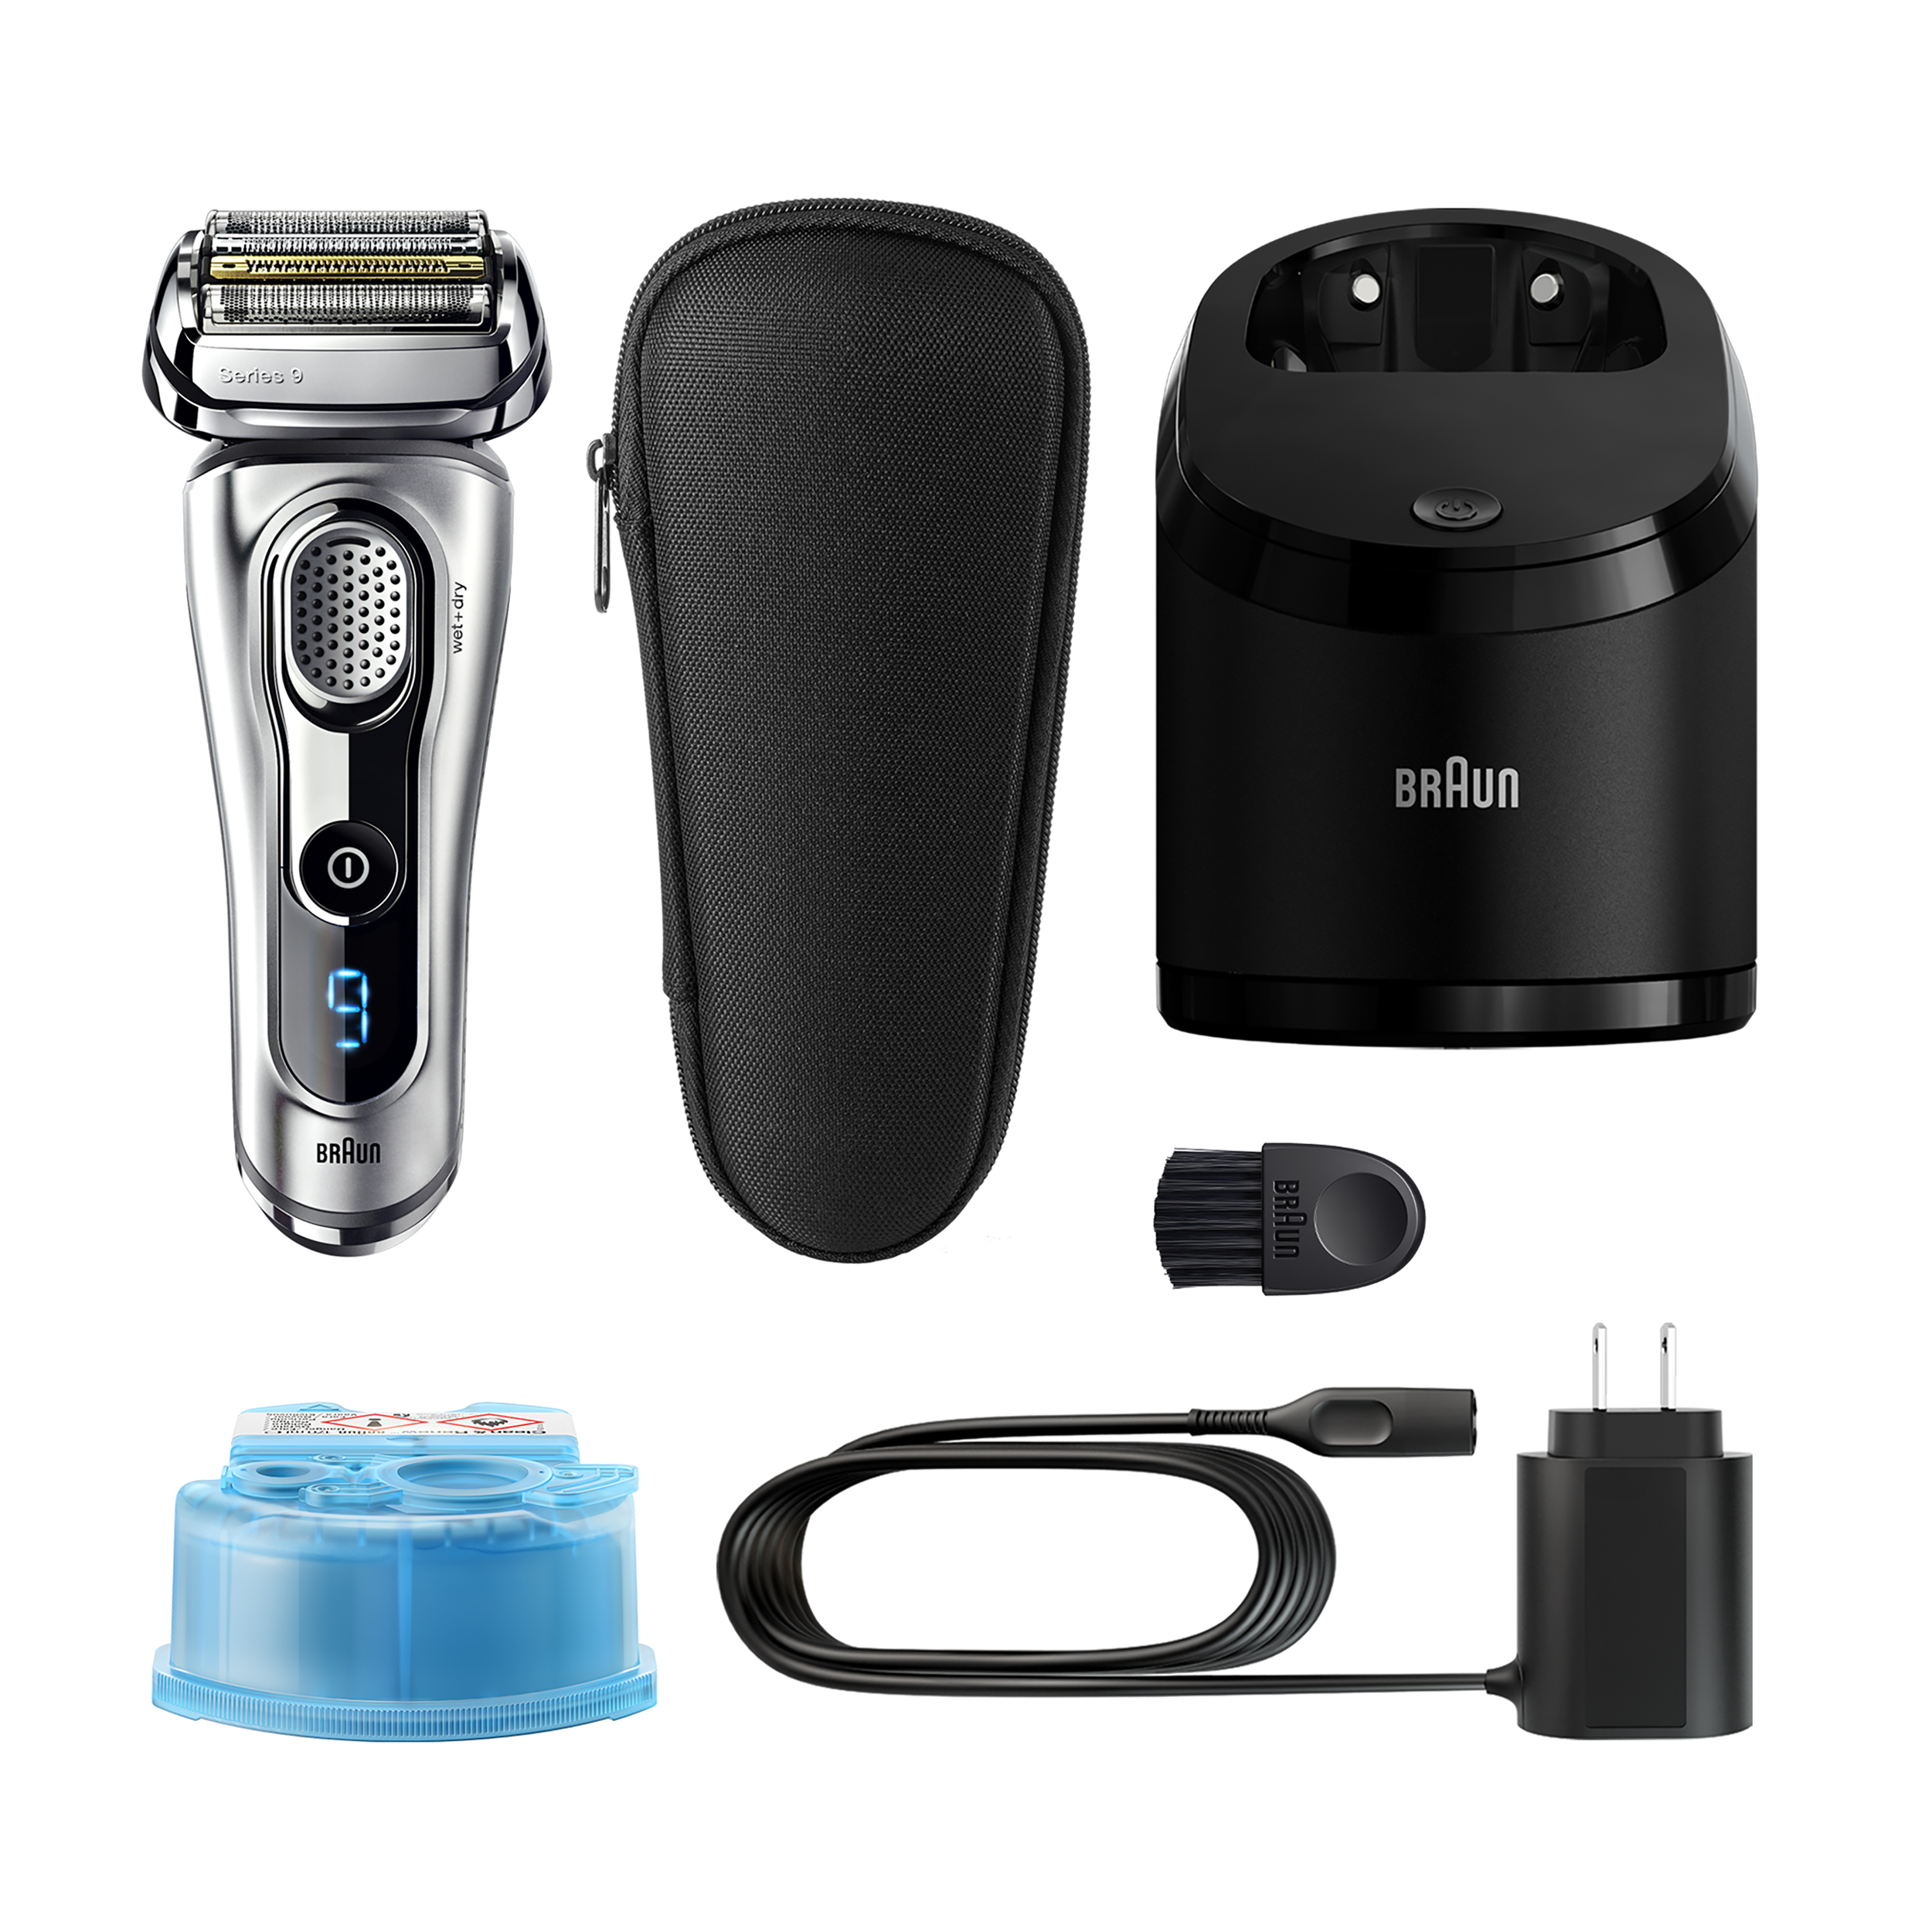 Braun Series 9 9290cc Men's Electric Shaver with Clean Station - image 5 of 7